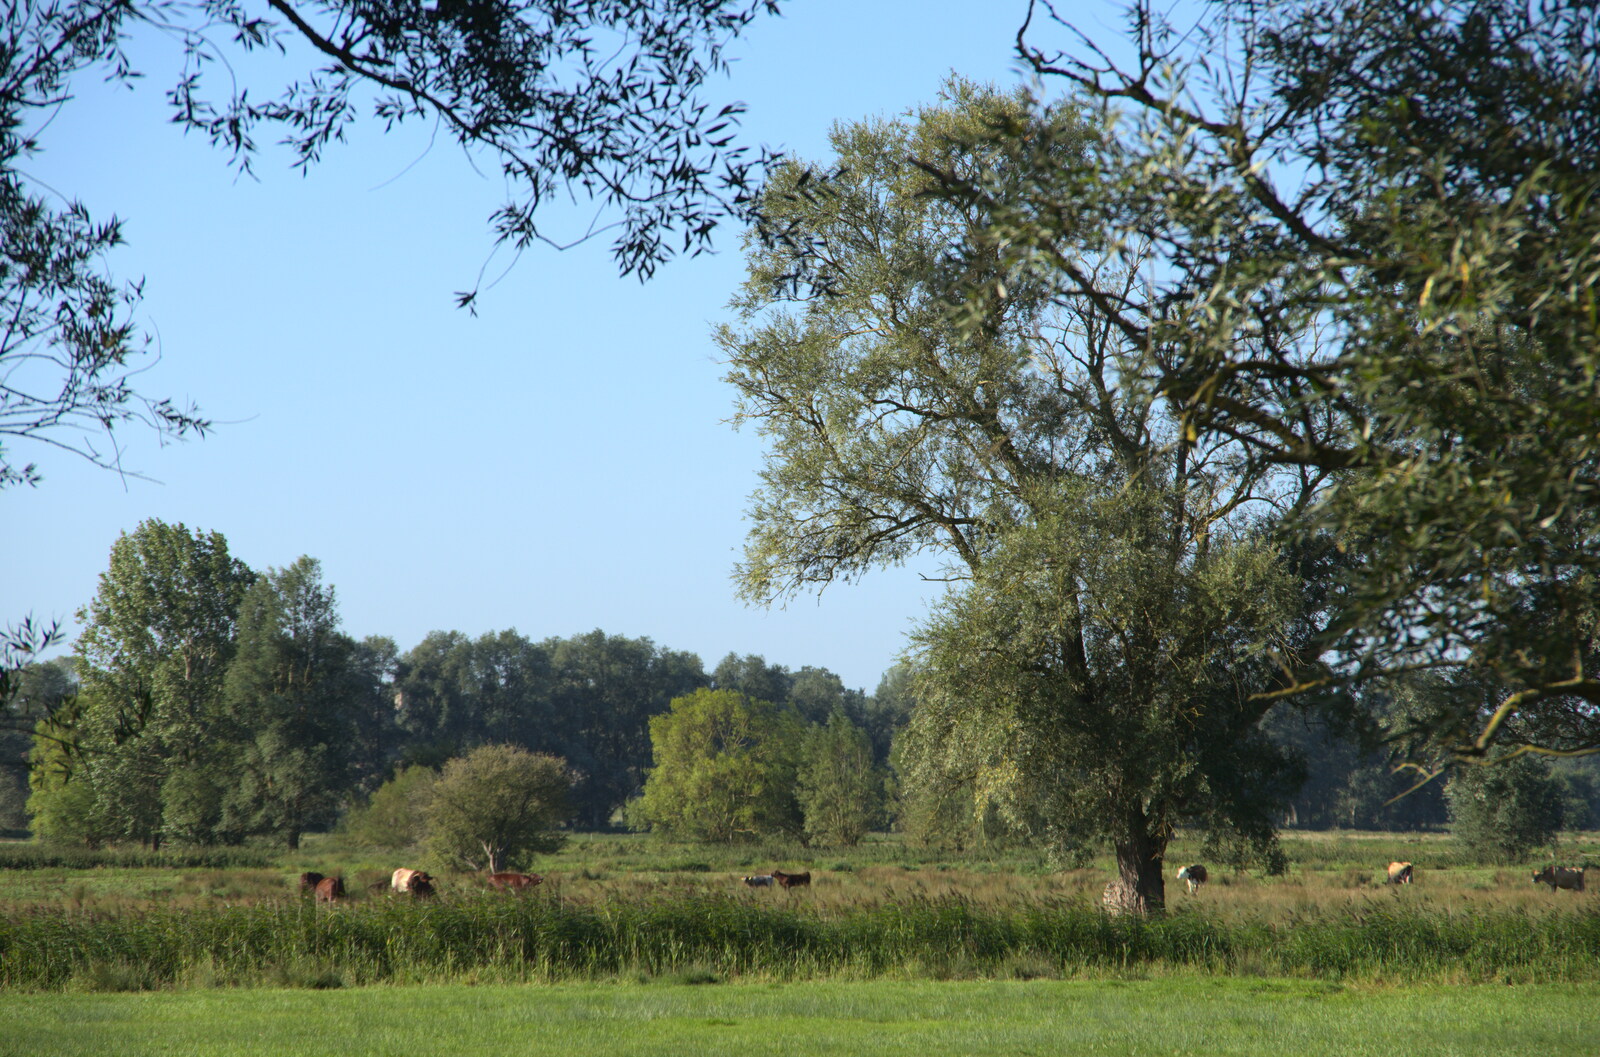 An idyllic view of the watermeadows from Camping at Three Rivers, Geldeston, Norfolk - 5th September 2020